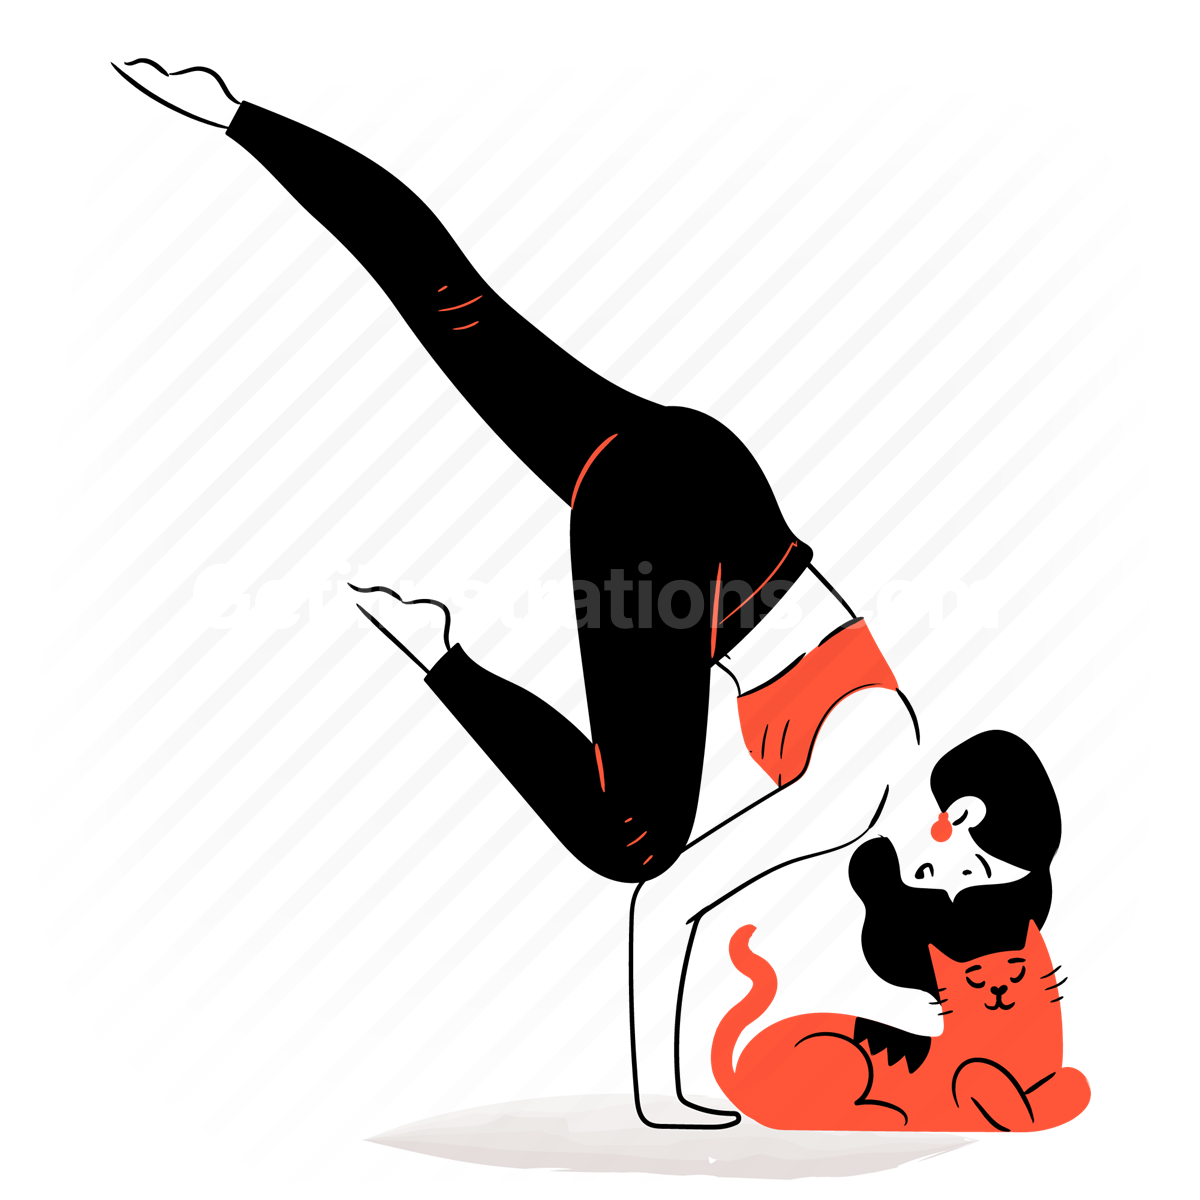 Sports and Fitness illustration